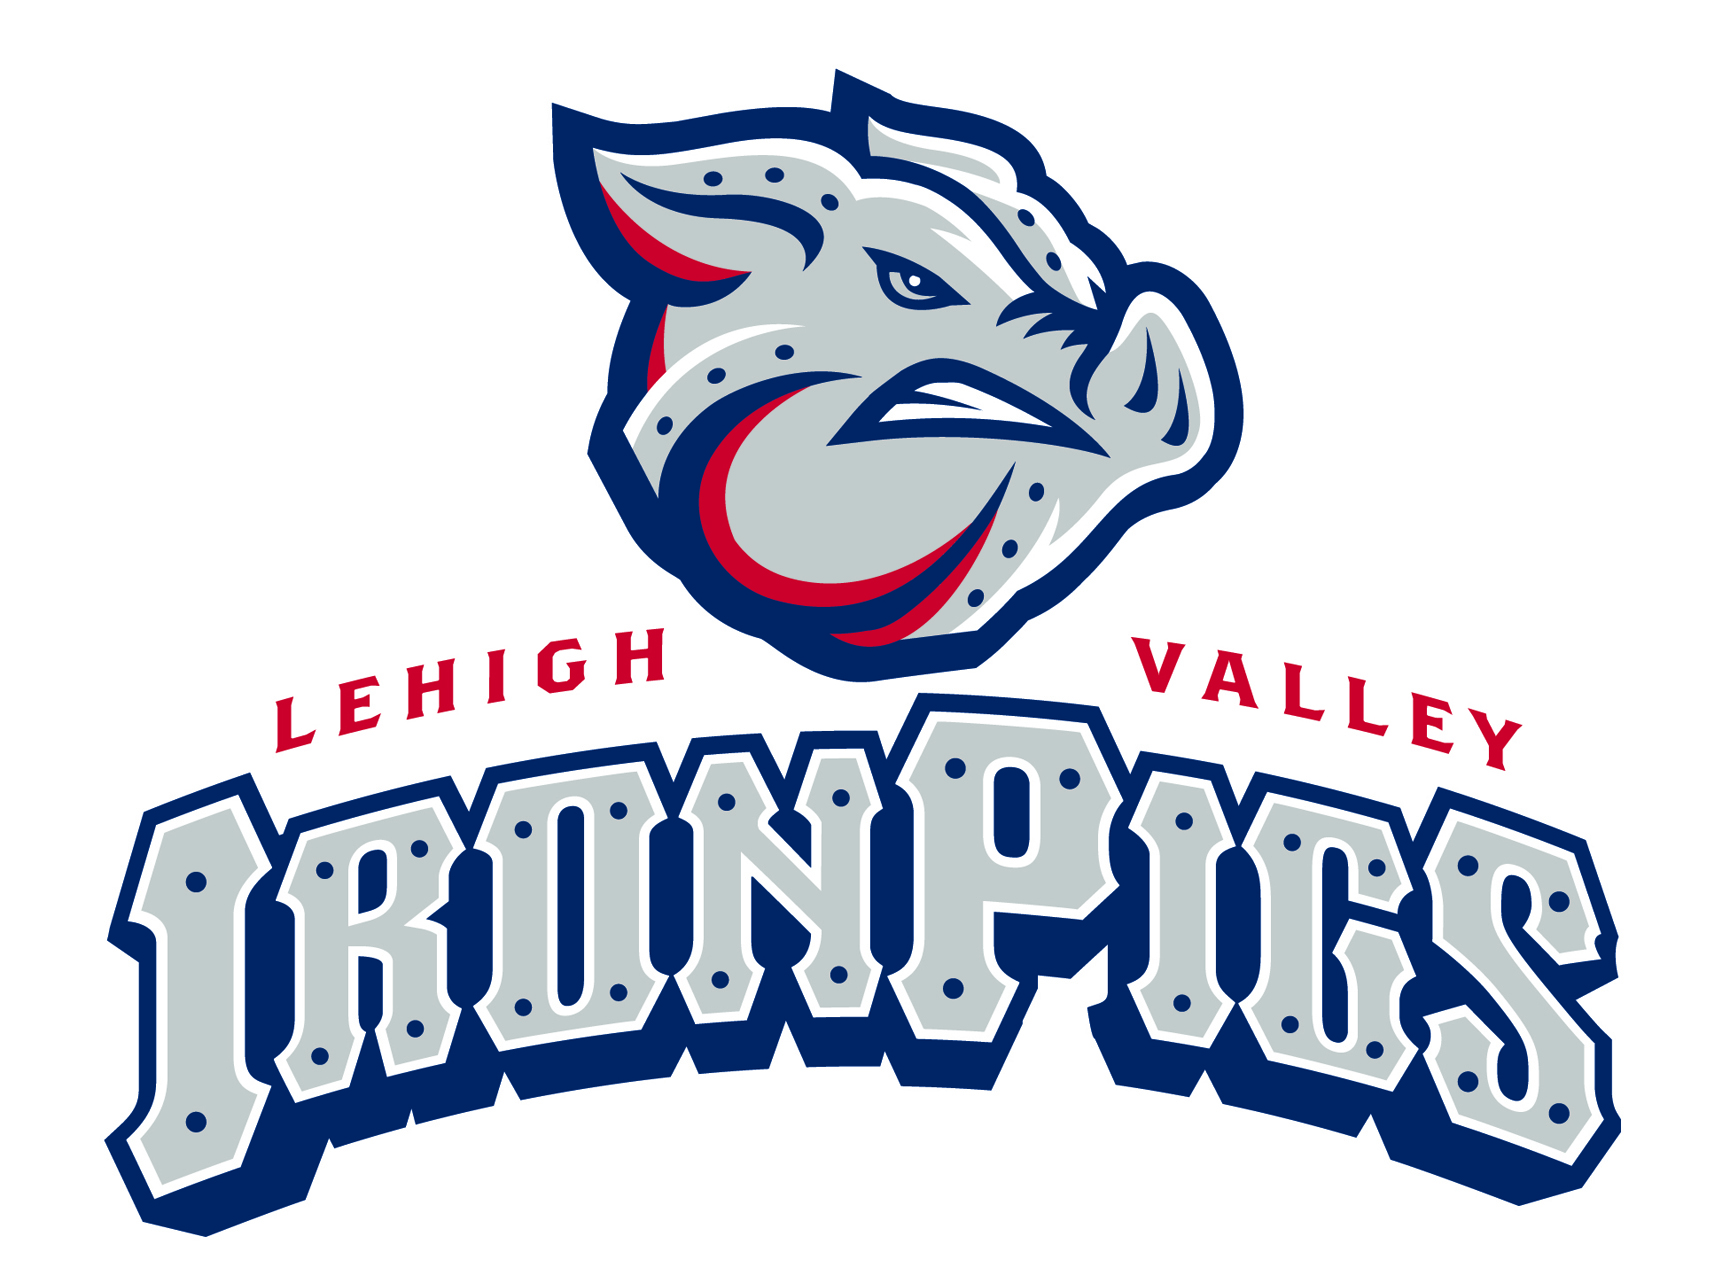 Click here to go to the Lehigh Valley Iron Pigs website.